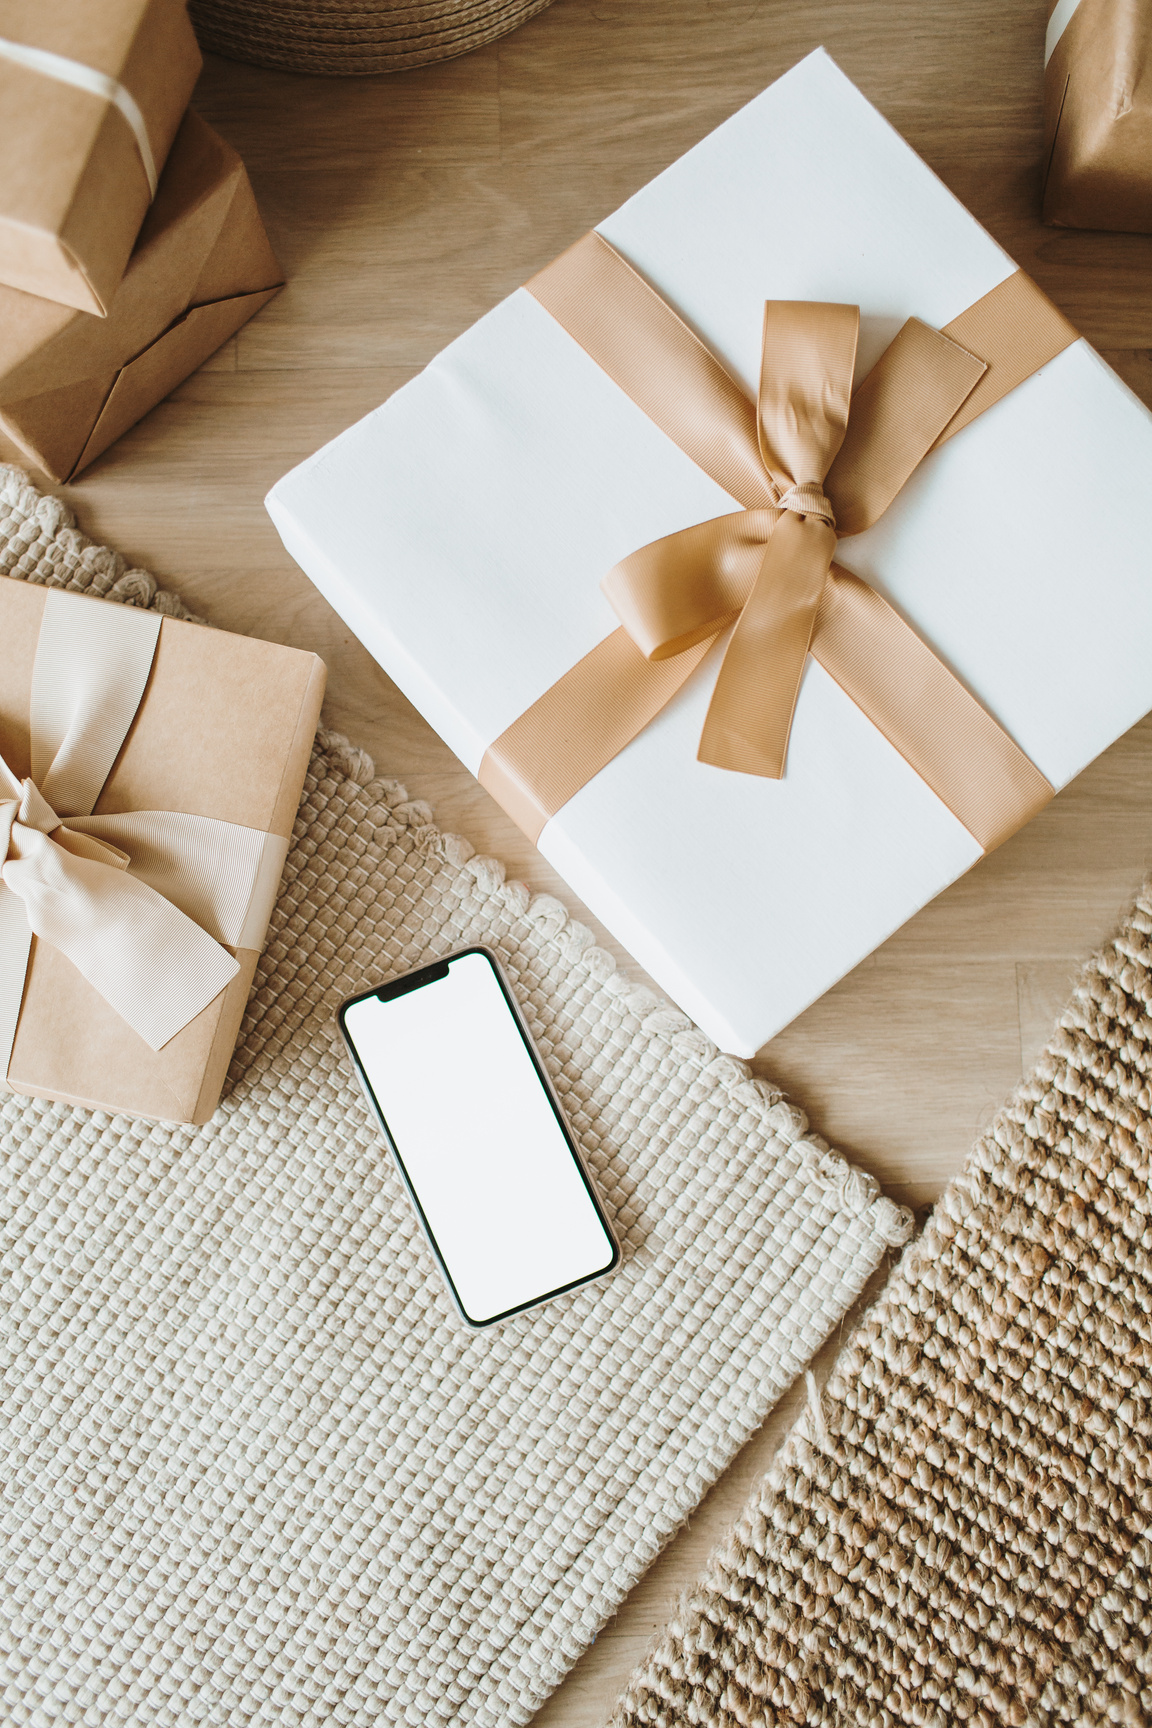 Gift Boxes with Ribbon and Smartphone